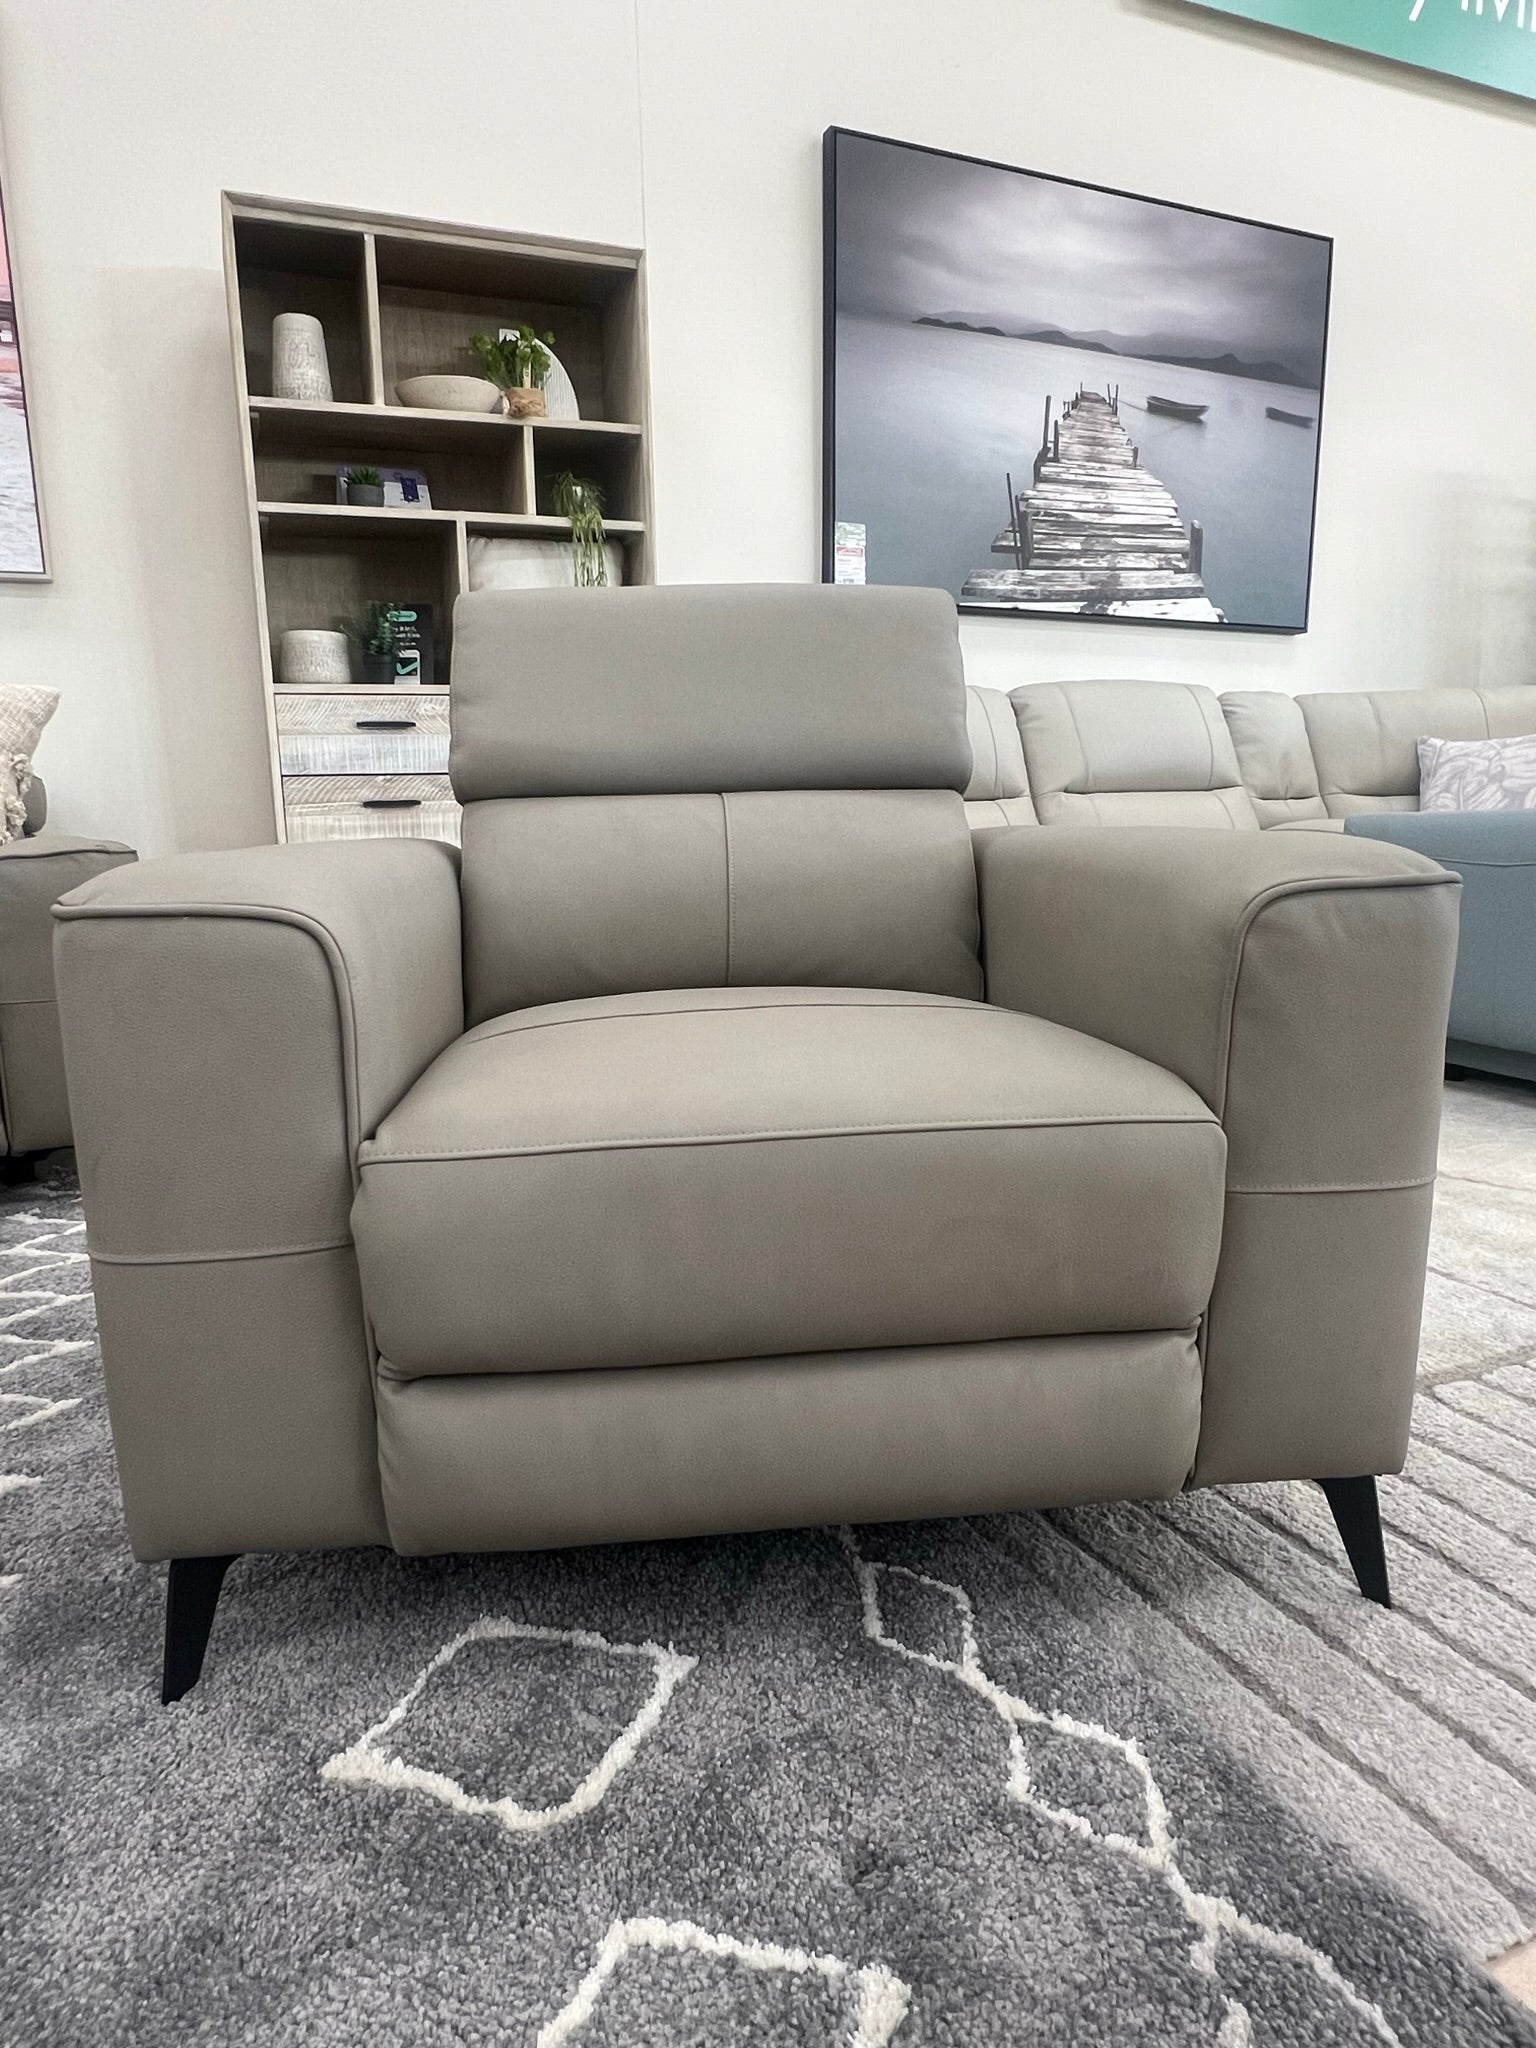 Luisa 2 + 1 + 1 Leather Recliner Package in Taupe Grey